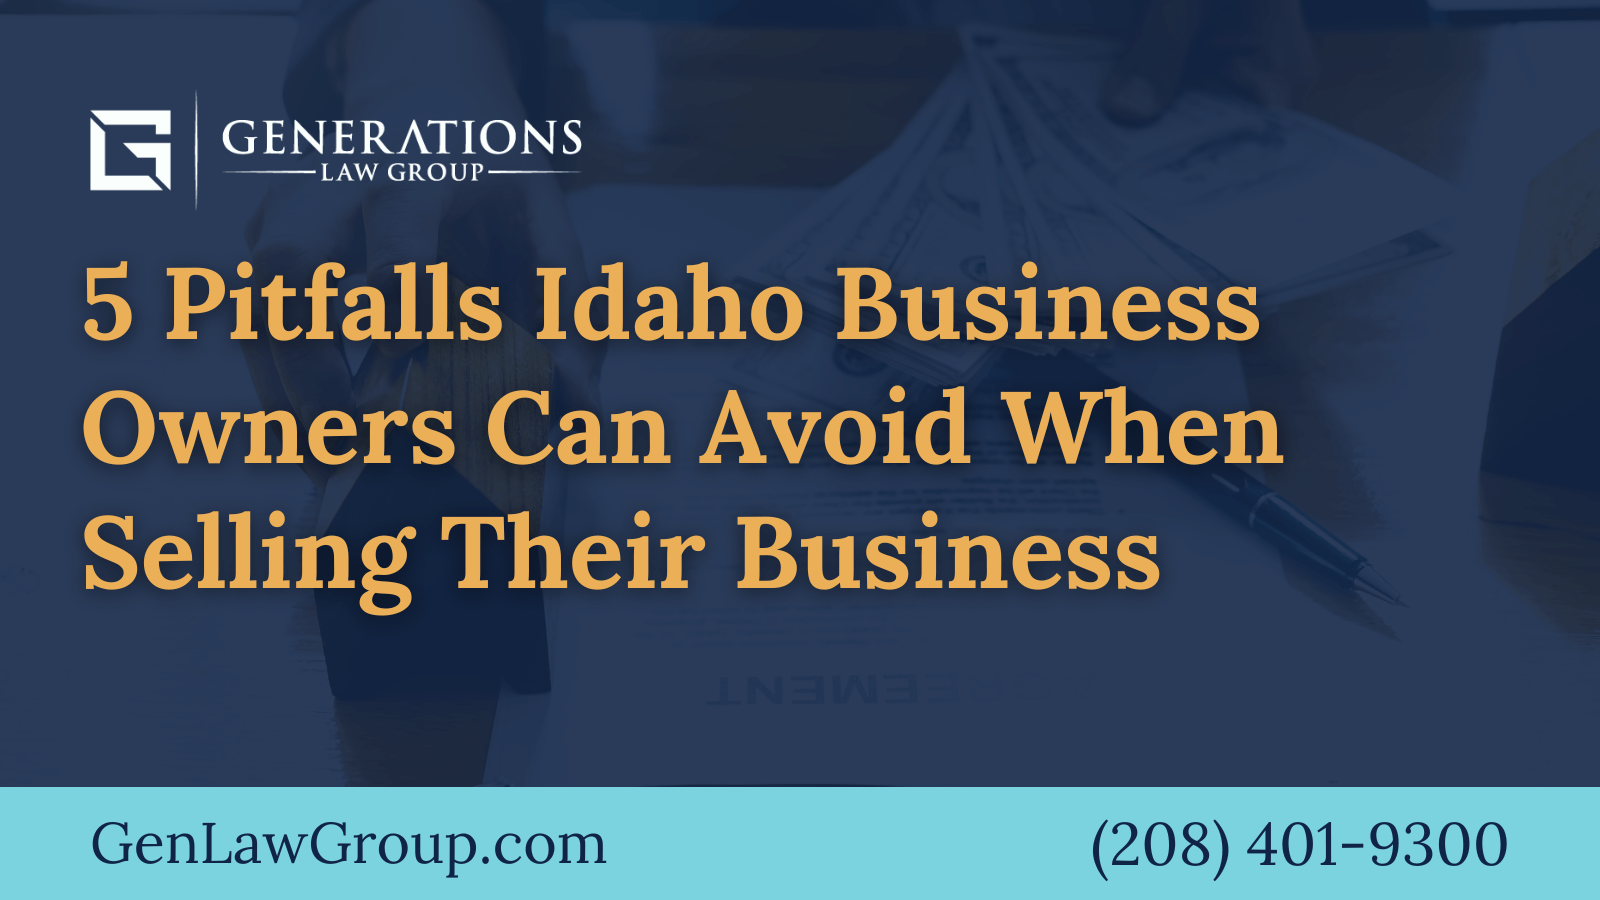 5 Pitfalls Idaho Business Owners Can Avoid When Selling Their Business